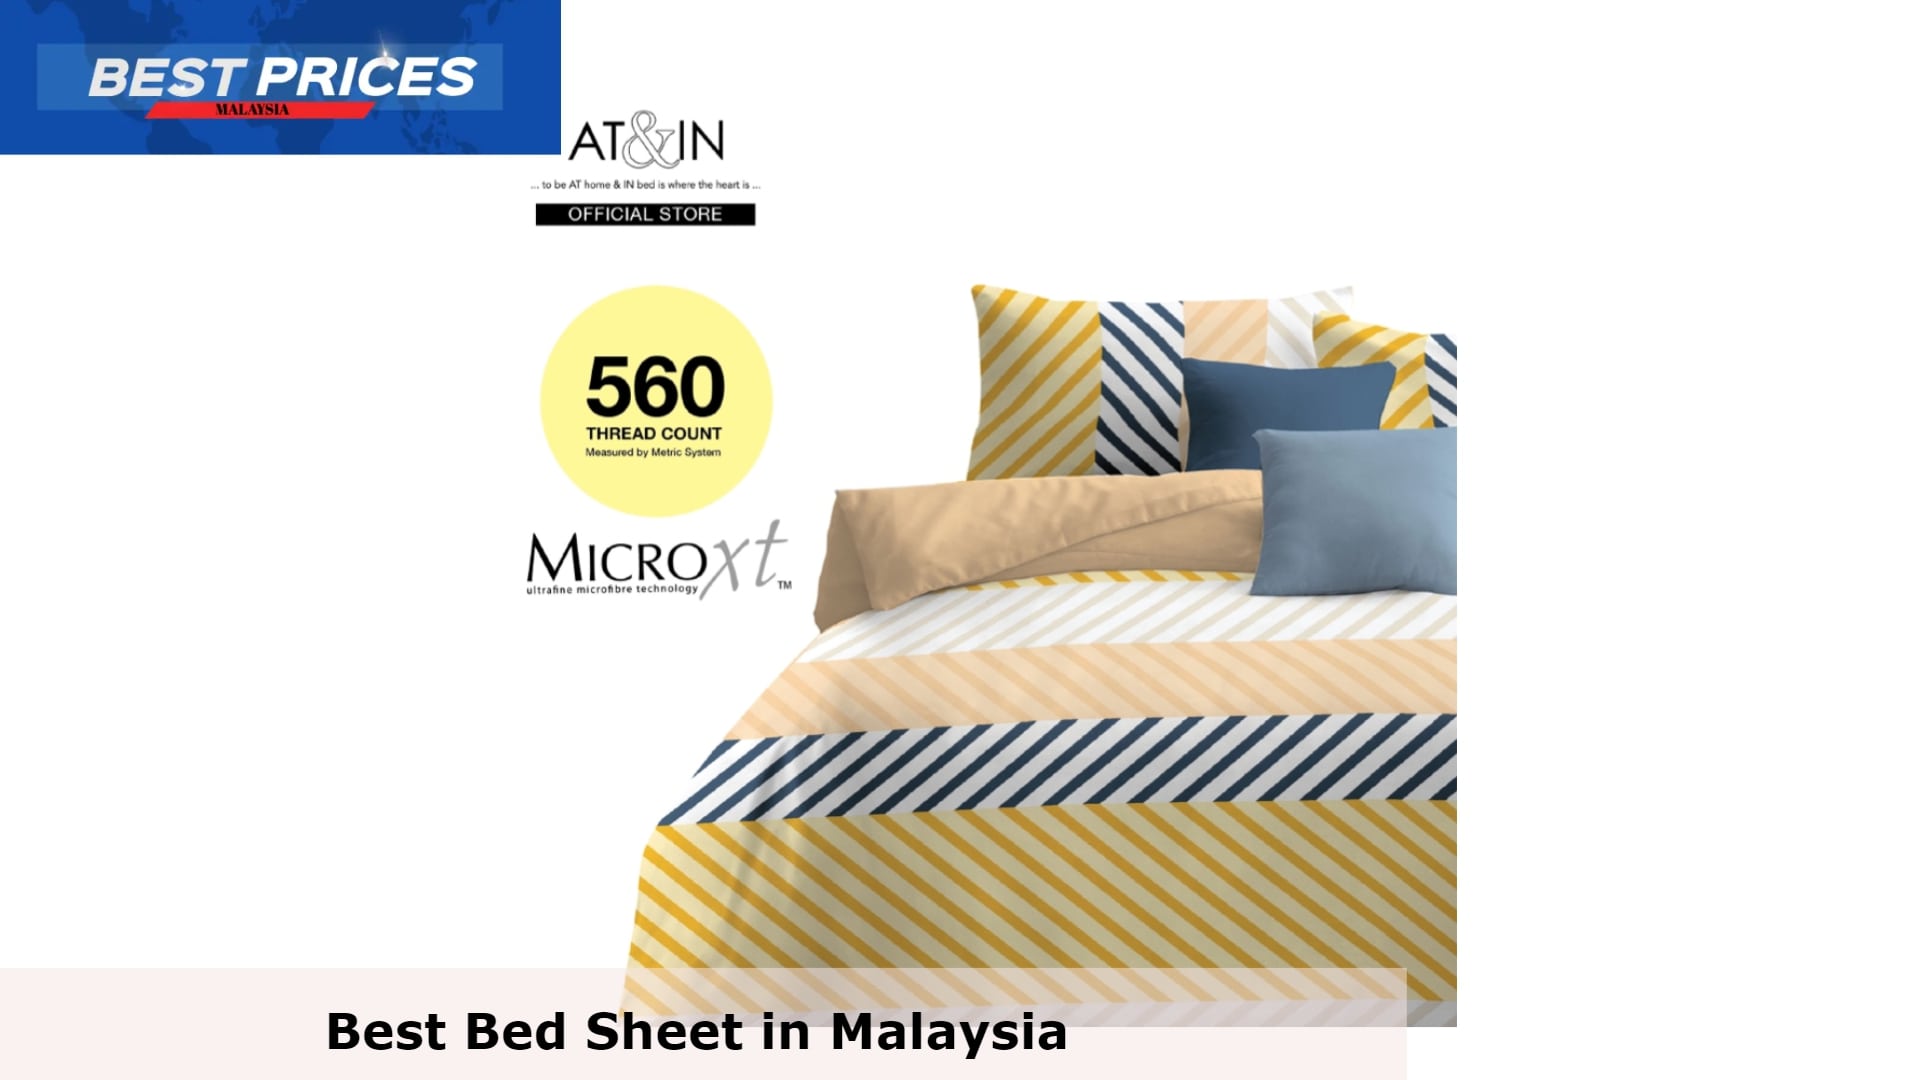 AT&IN Luv&Fancy Fitted Sheet Set 560TC - Bed Sheet Malaysia, Bed Sheet Malaysia, best bedsheet Malaysia, where to order bedsheet online Malaysia, bed sheet brand, bed sheet brand malaysia, best bed sheet malaysia, Best bedsheet brand Malaysia, bed sheet set, Which quality bedsheet is best?, Which cotton bedsheet is best?, Which bedsheet brand is good in Malaysia?, Is bedsheet and blanket same?, What is the point of a bedsheet?,